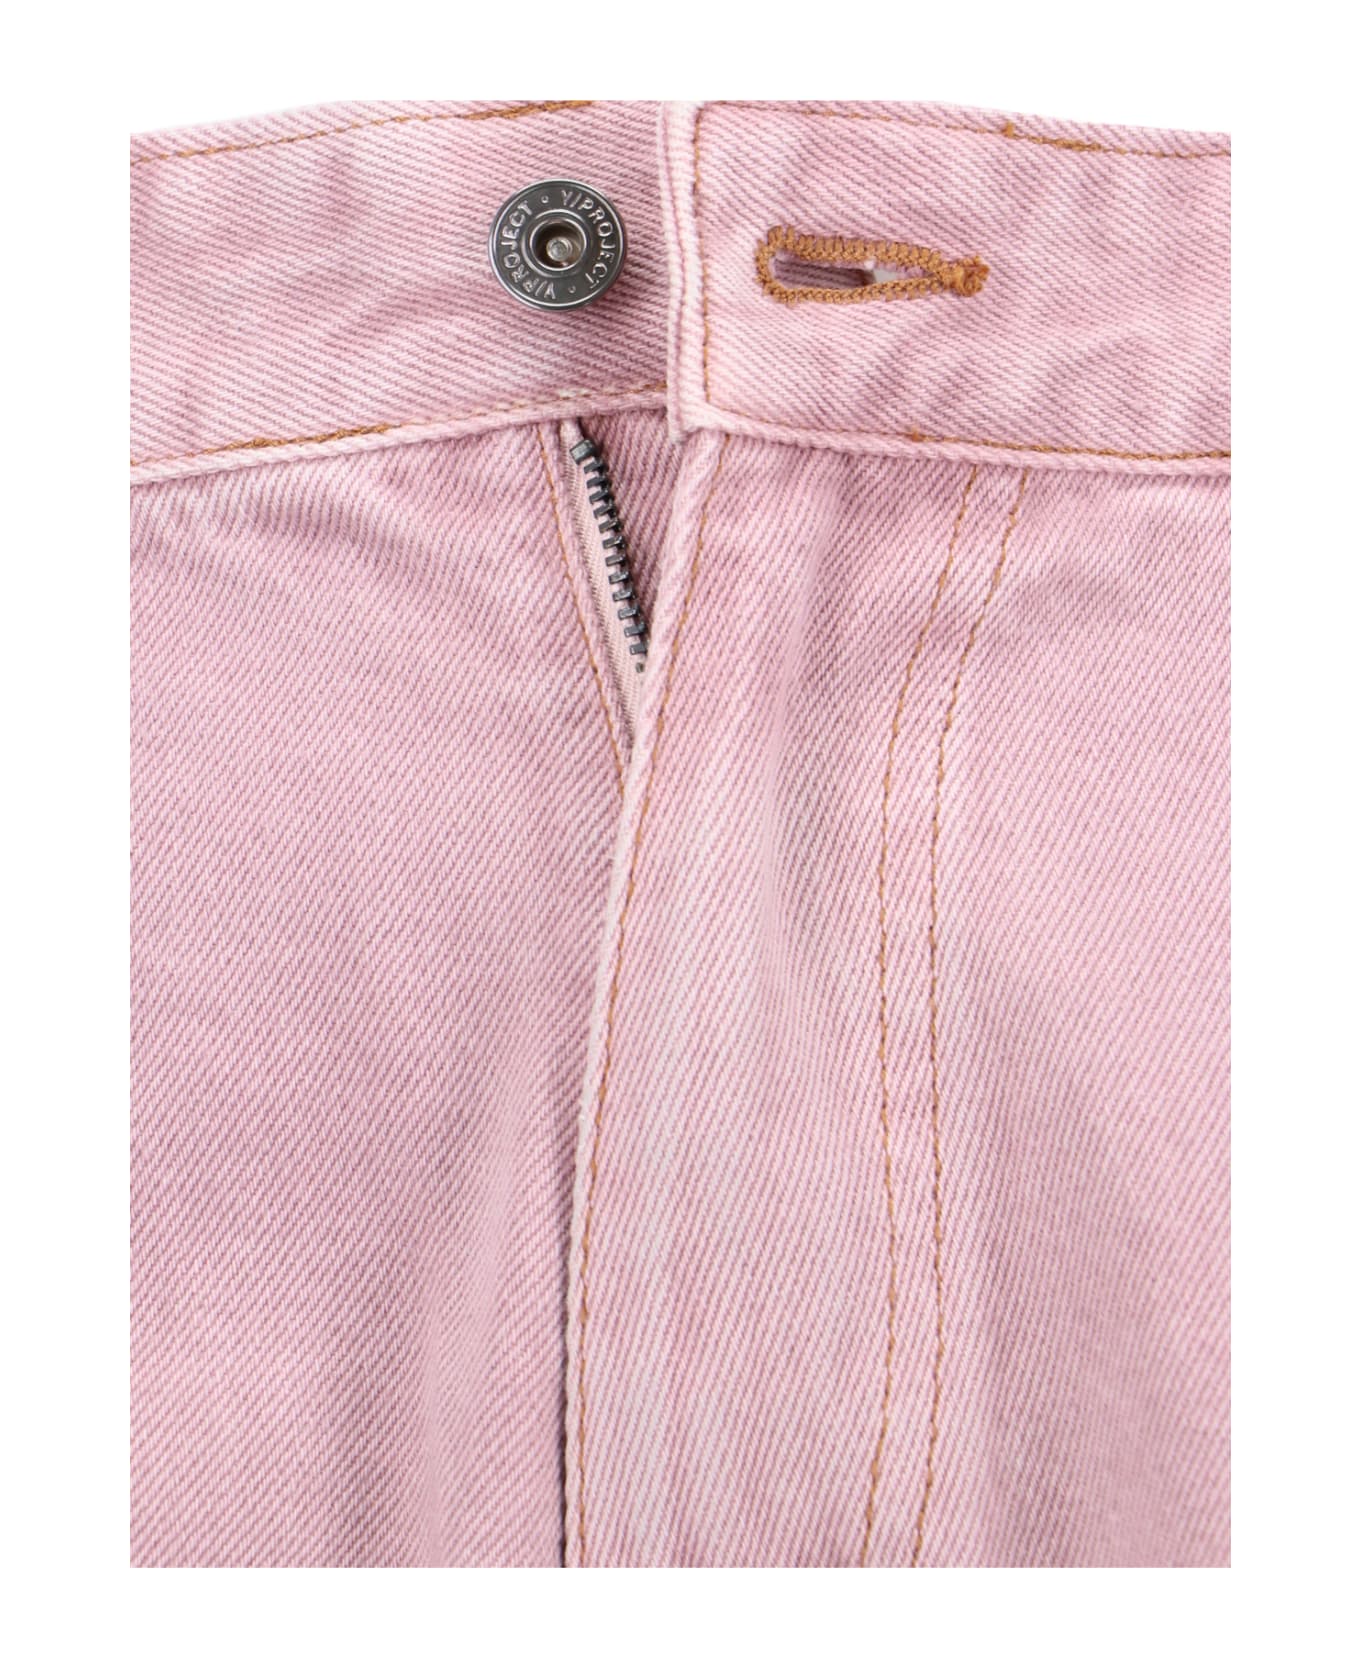 Y/Project Flared Jeans - Pink name:463